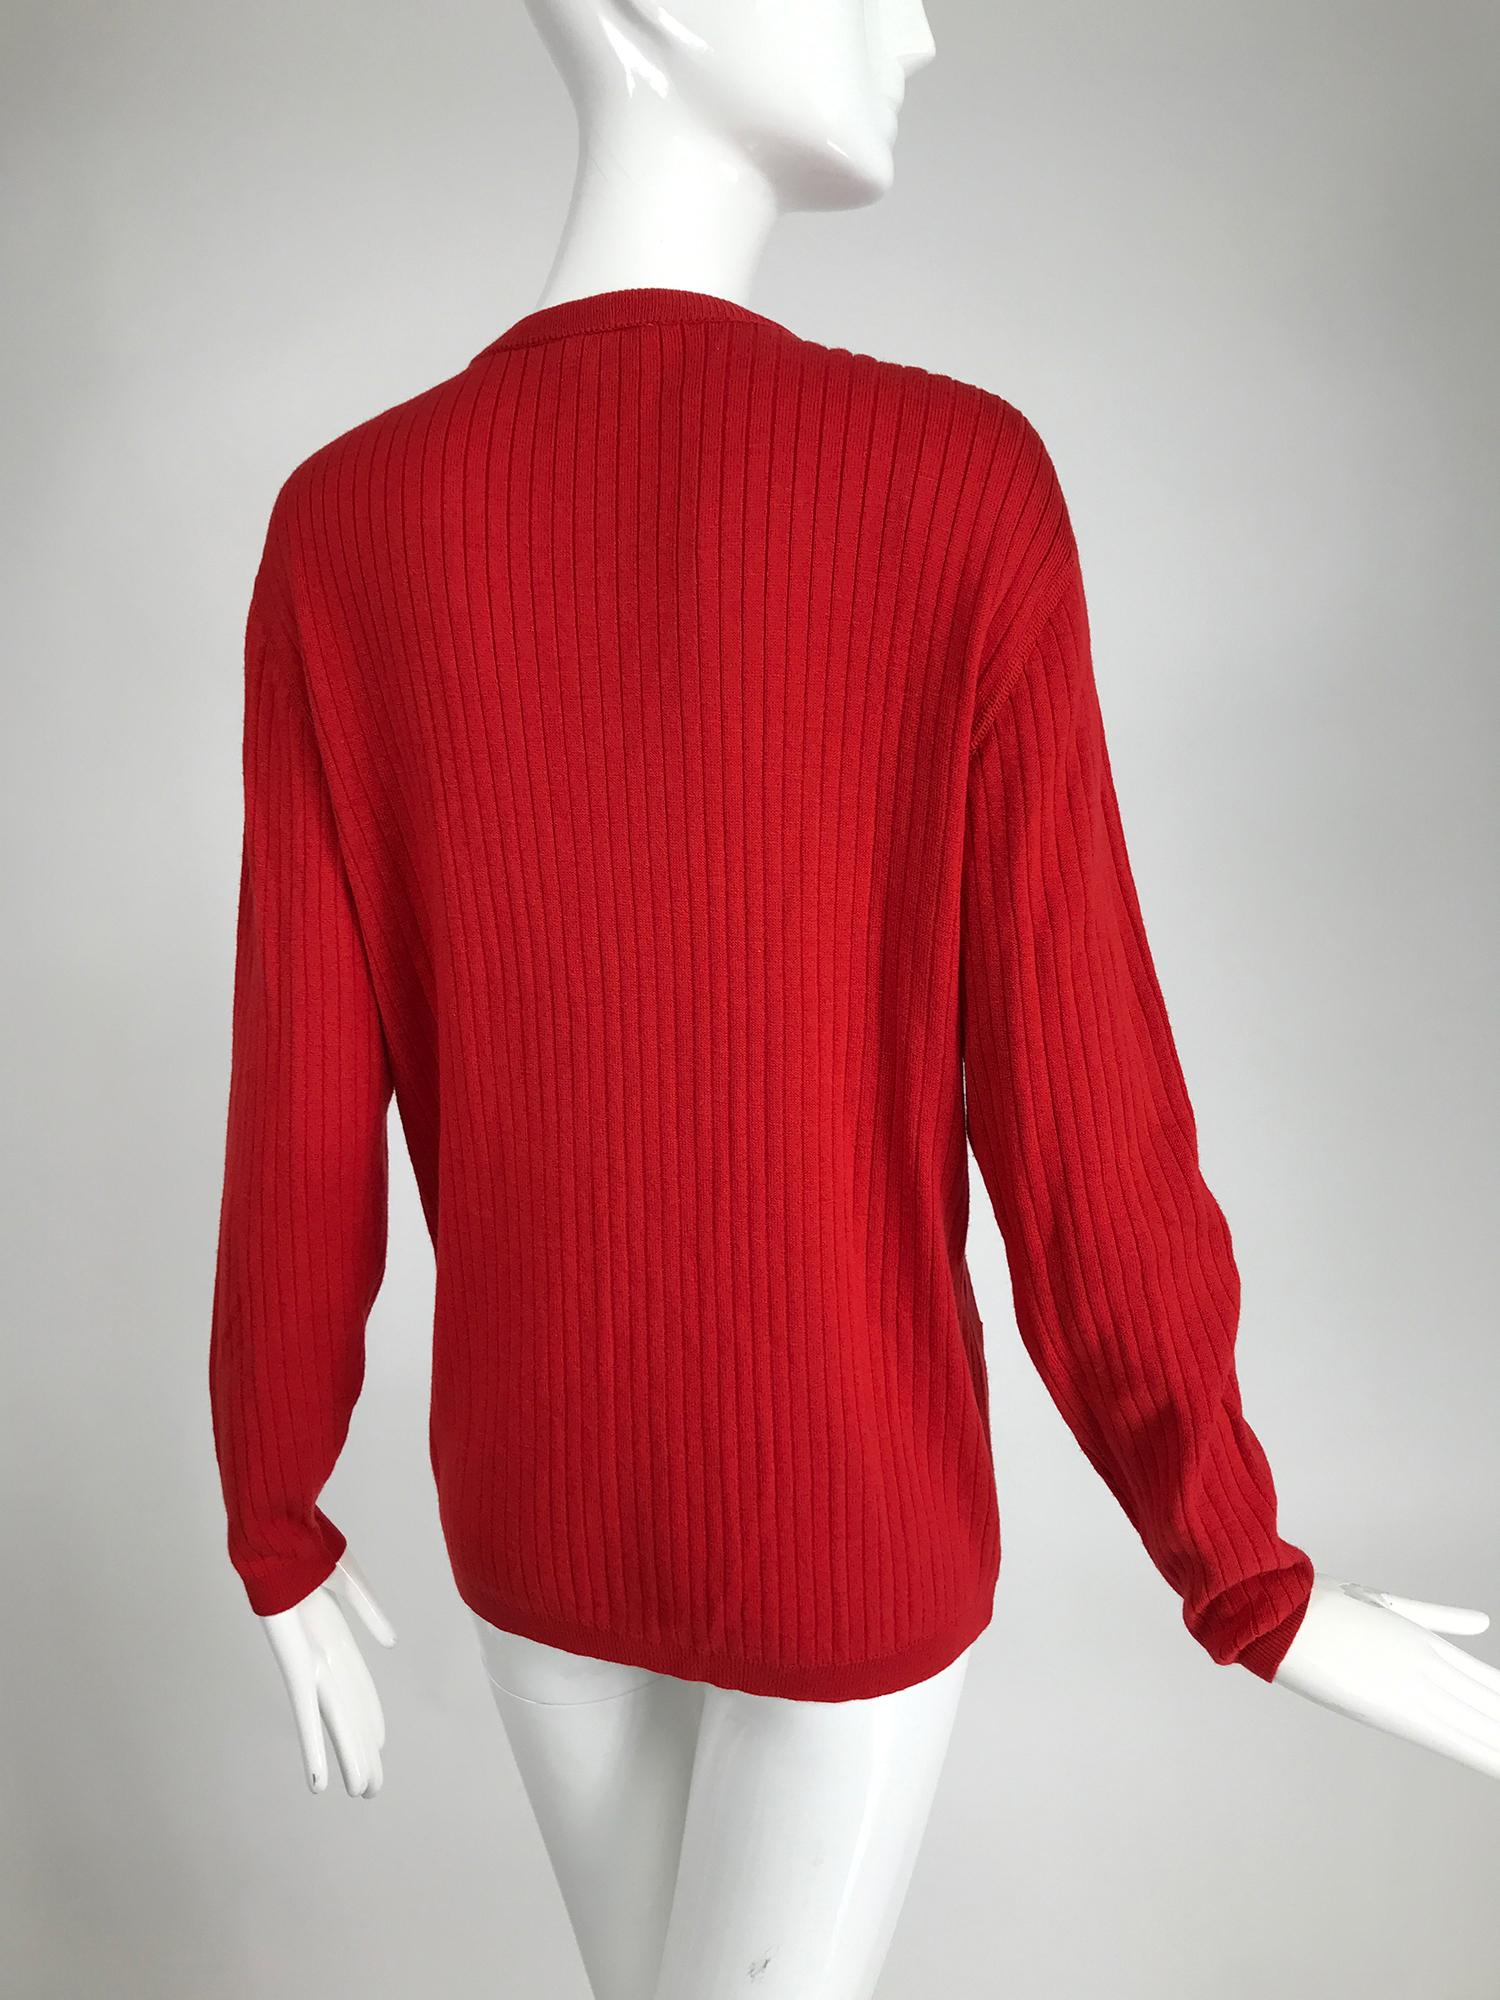 Women's Courreges Red V Neck Ribbed Cardigan Sweater